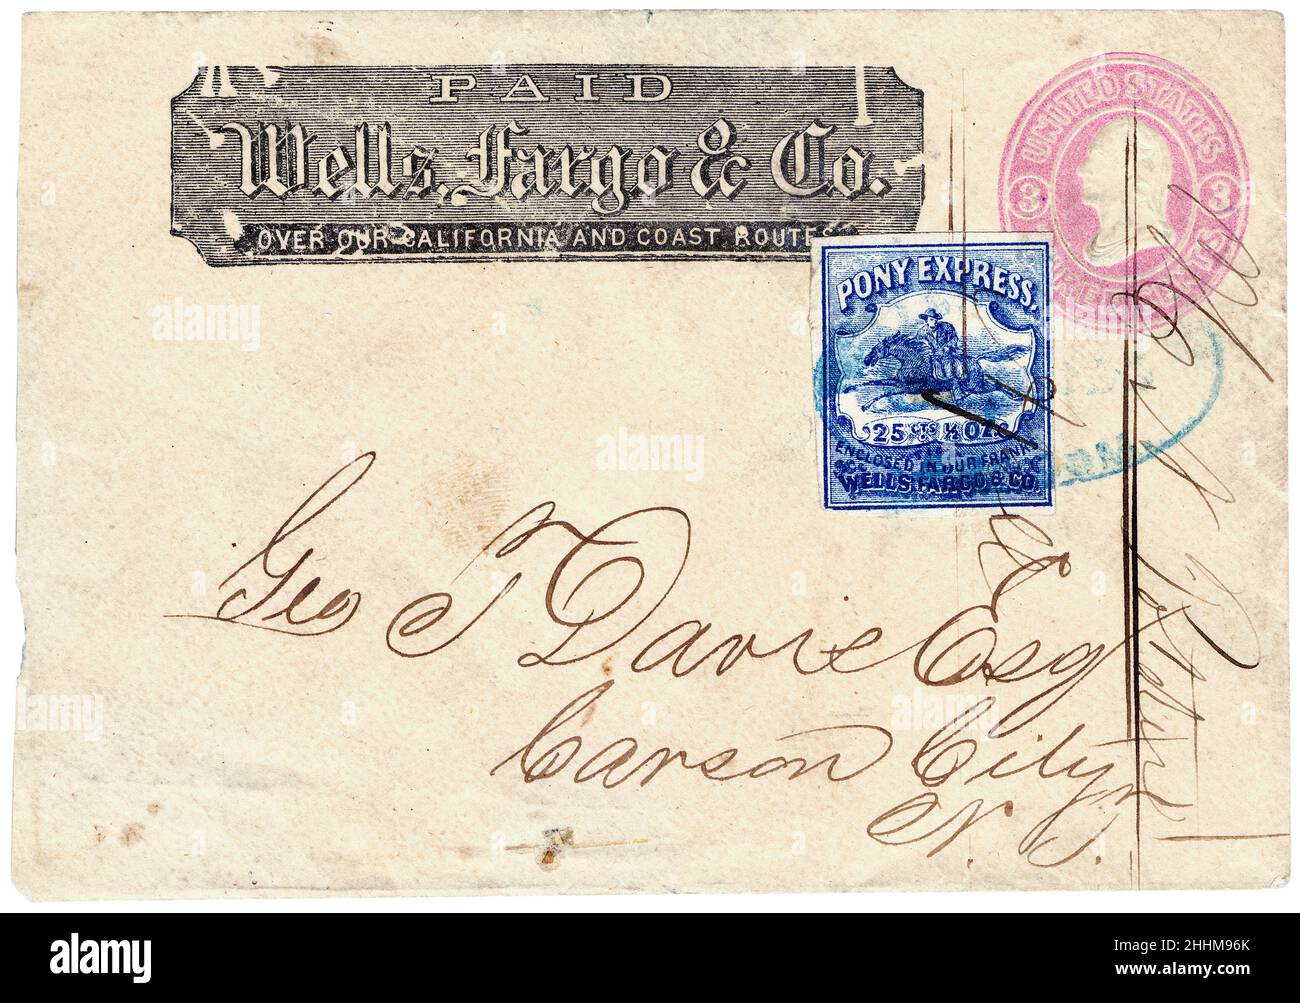 Wells Fargo & Co, Pony Express to Carson City NV, envelope and postage stamp, letter, 1862 Stock Photo